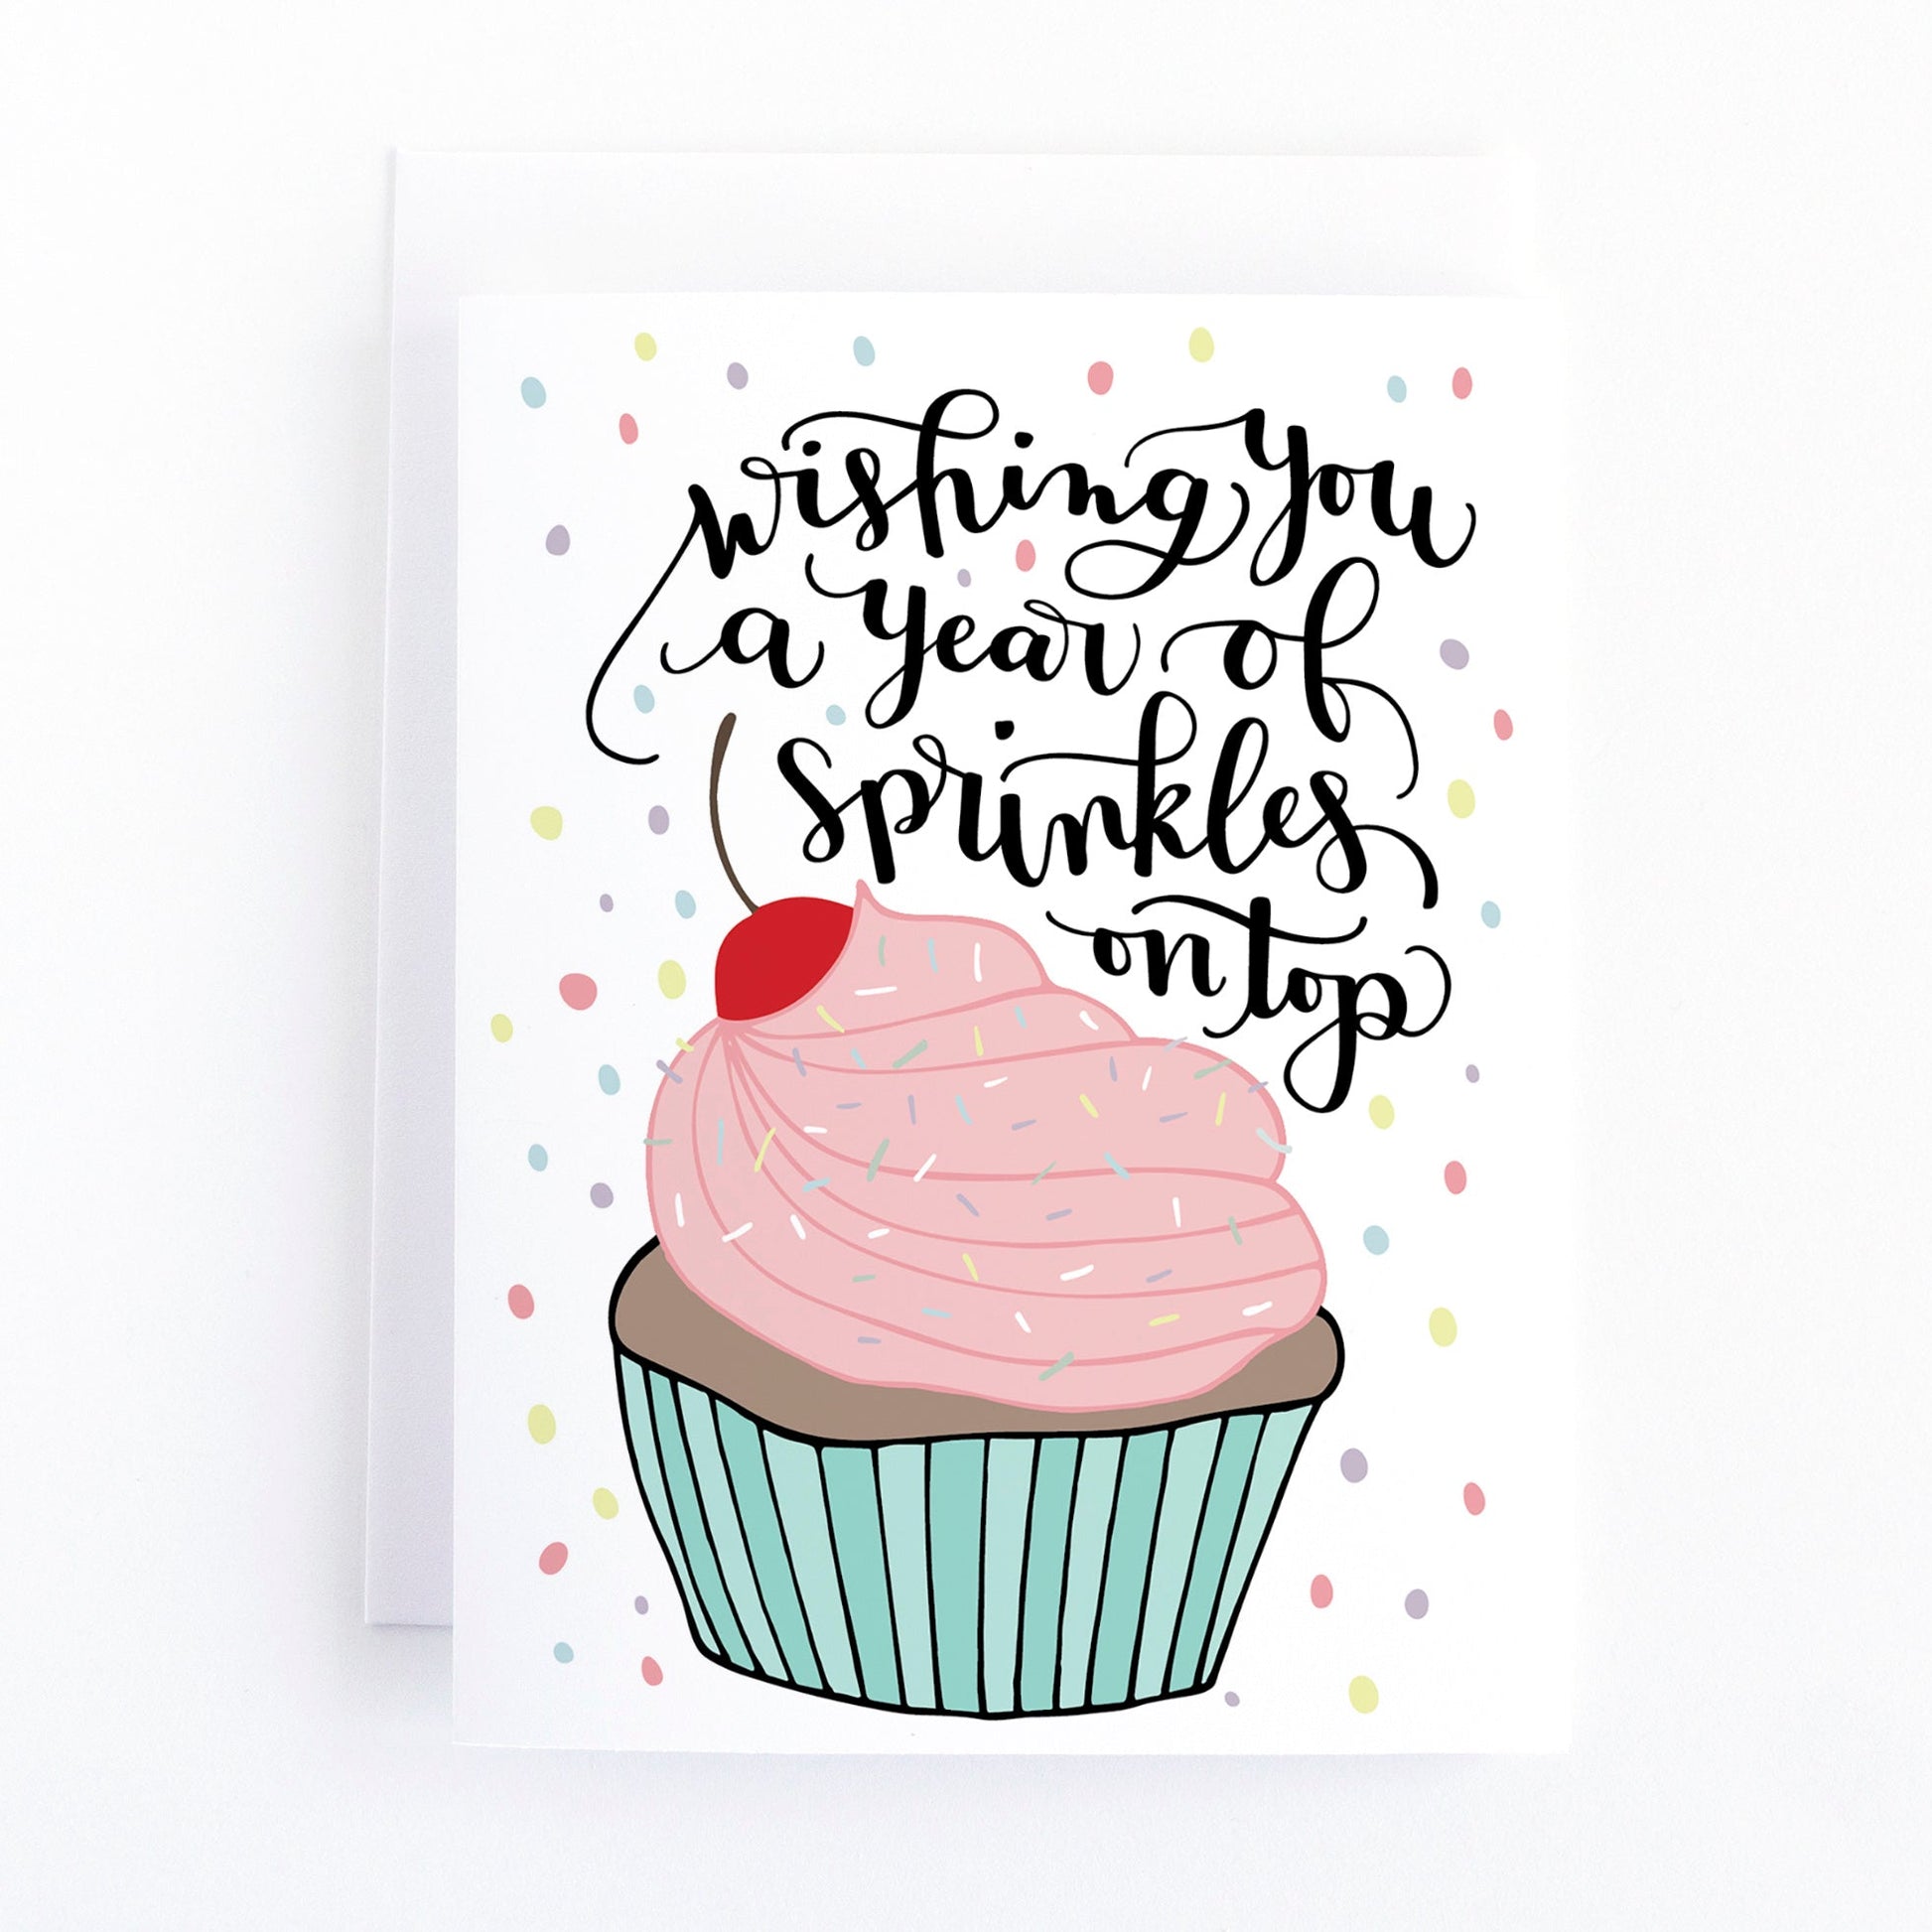 Birthday card with pink and blue cupcake that has sprinkles and cherry on top and a message that says wishing you a year of sprinkles on top.